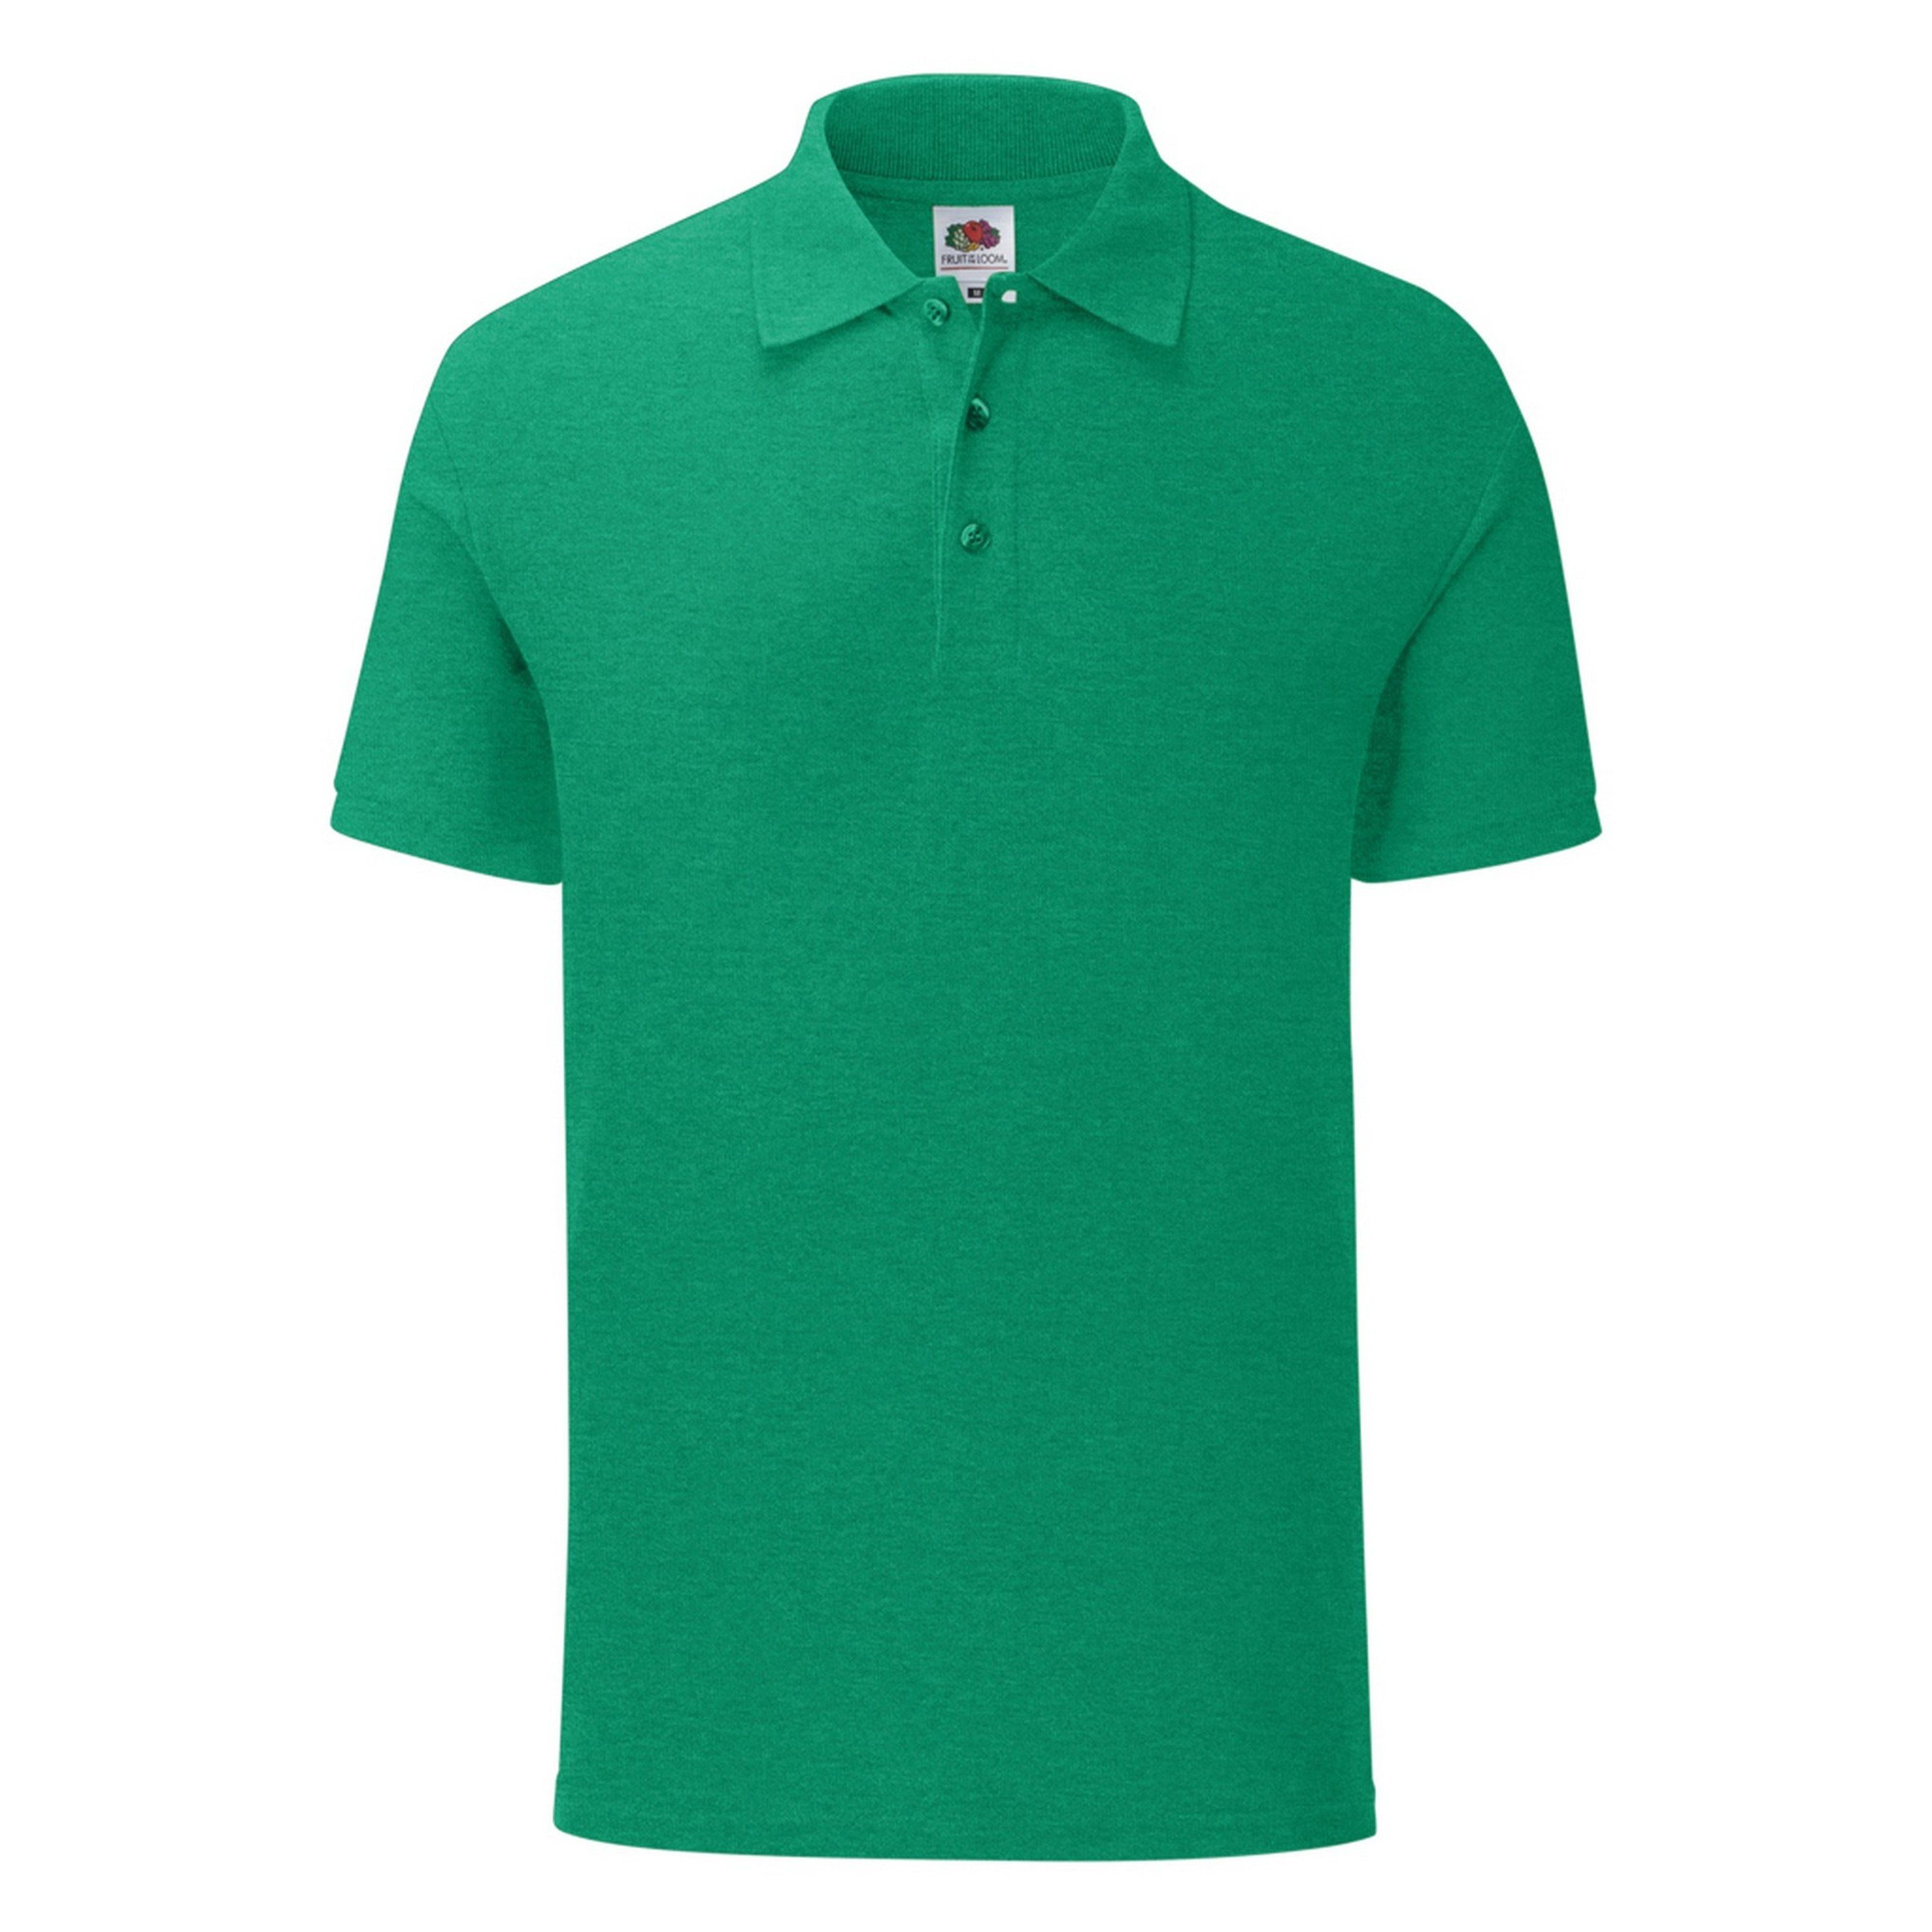 Fruit Of The Loom Mens Iconic Pique Polo Shirt (Heather Green) - L - Also in: XXL, 3XL, S, XL, M | Verishop